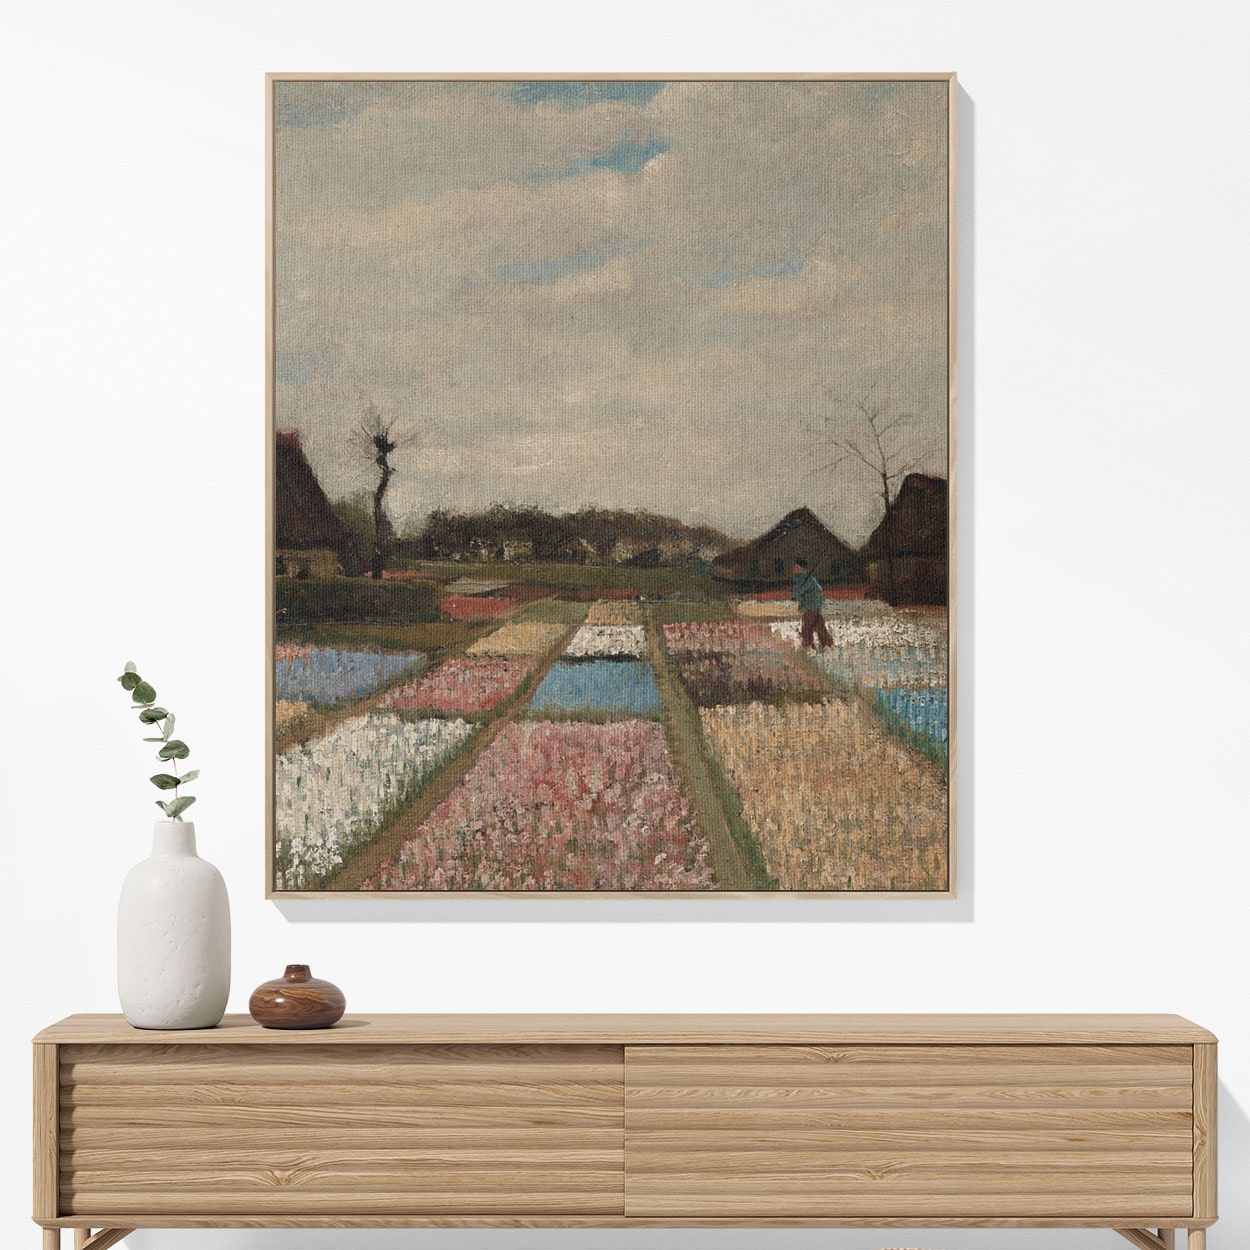 Floral Landscape Woven Blanket Woven Blanket Hanging on a Wall as Framed Wall Art